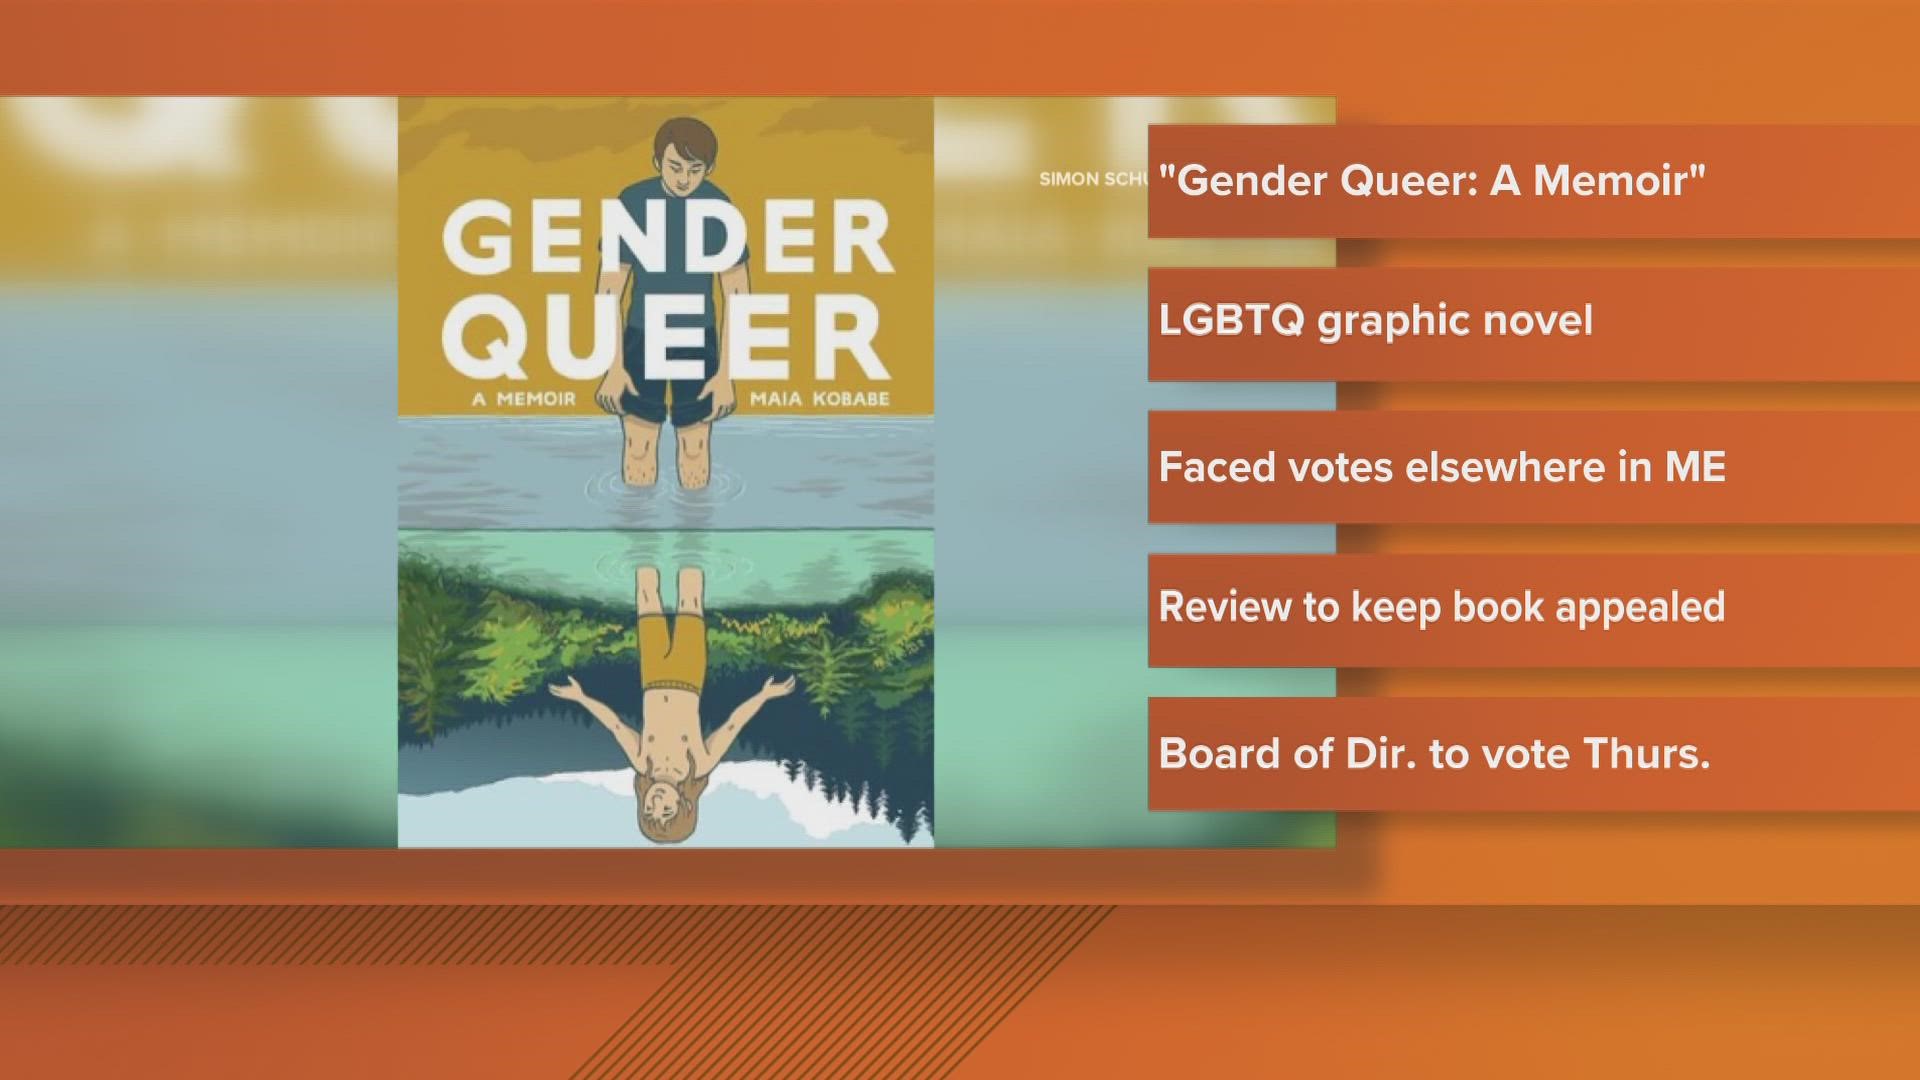 In November, a review committee recommended that the book "Gender Queer: A Memoir" stay at Leavitt Area High School, but that decision may be appealed.